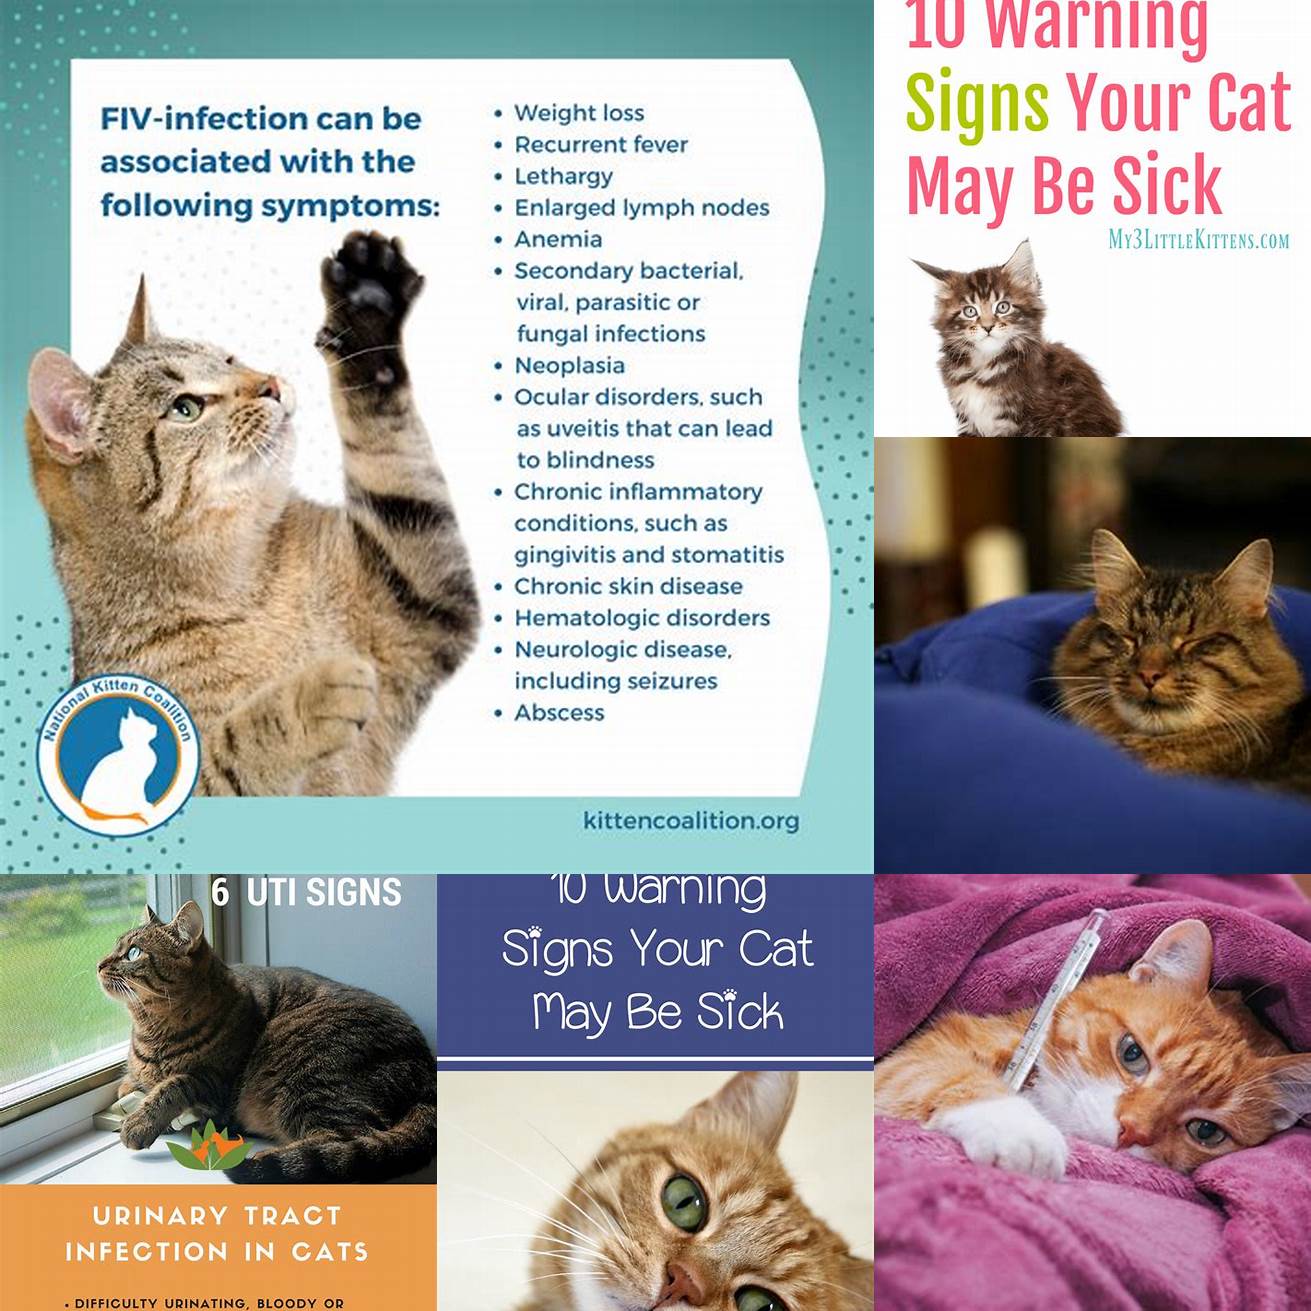 Monitor your cats symptoms